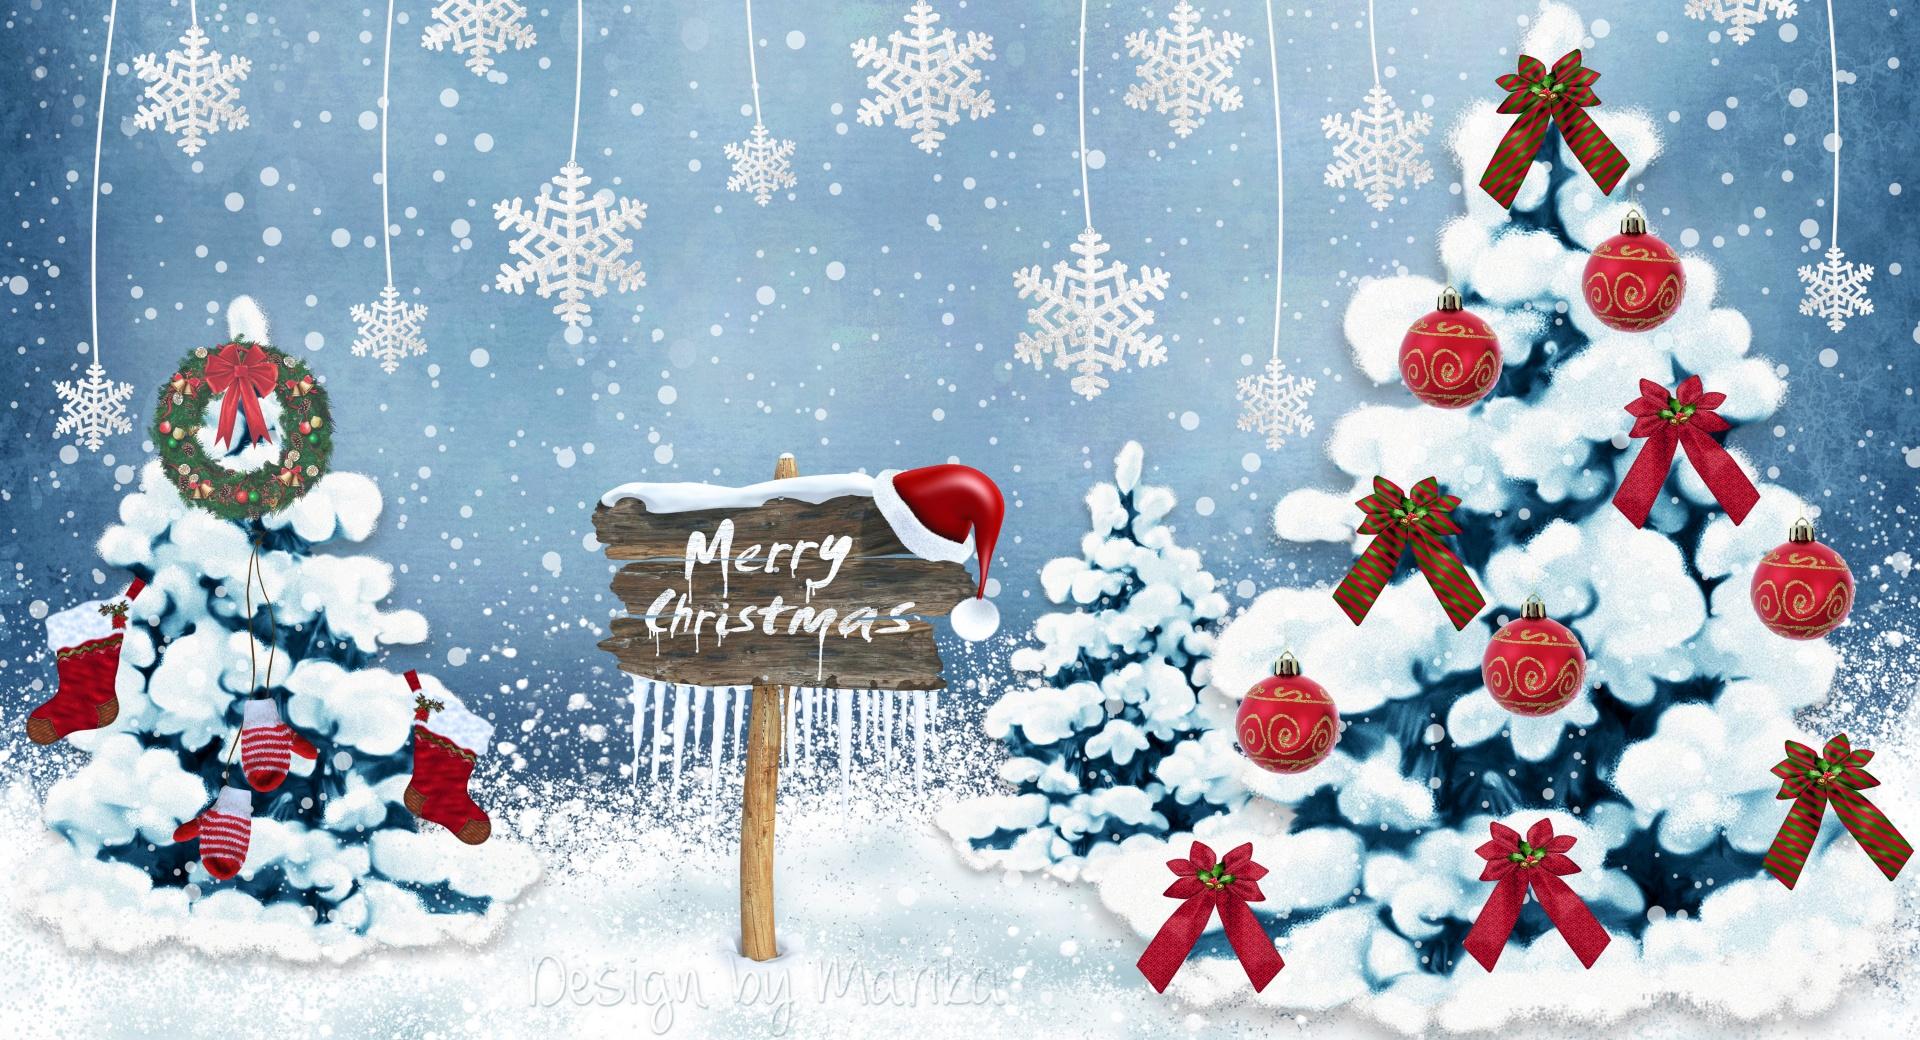 Merry Christmas 2014 wallpapers HD quality